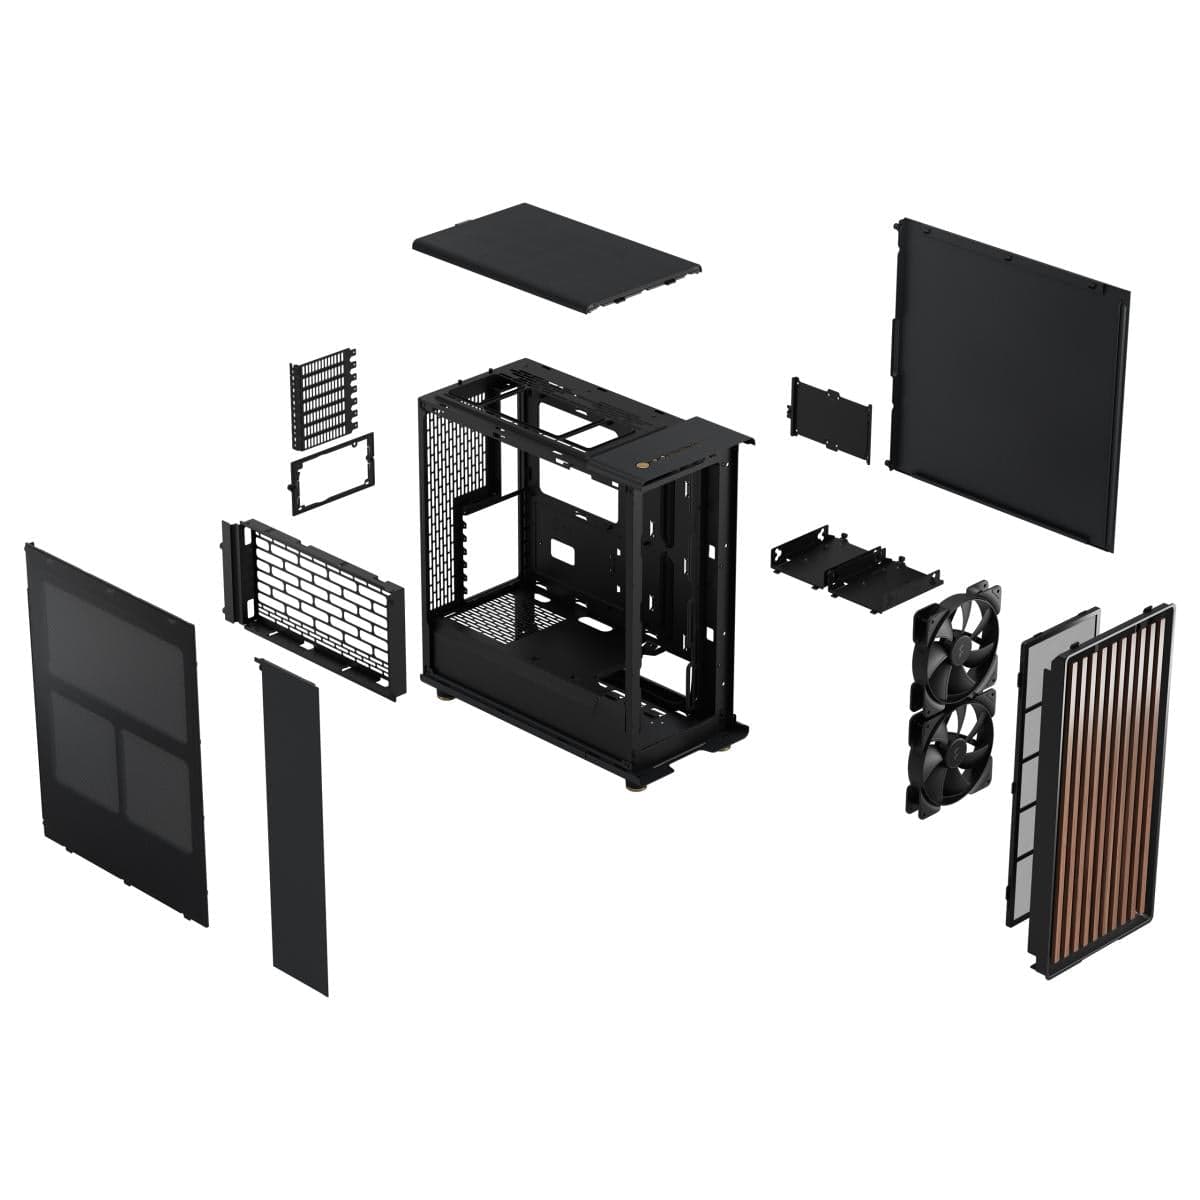 Fractal PC CASE Fractal Design North (Charcoal Black Mesh Ventilated Side) Mid-Tower Elegance Front Wood Gaming Case w/ Type-C & (Front) 2 x 140 mm PWM Fans